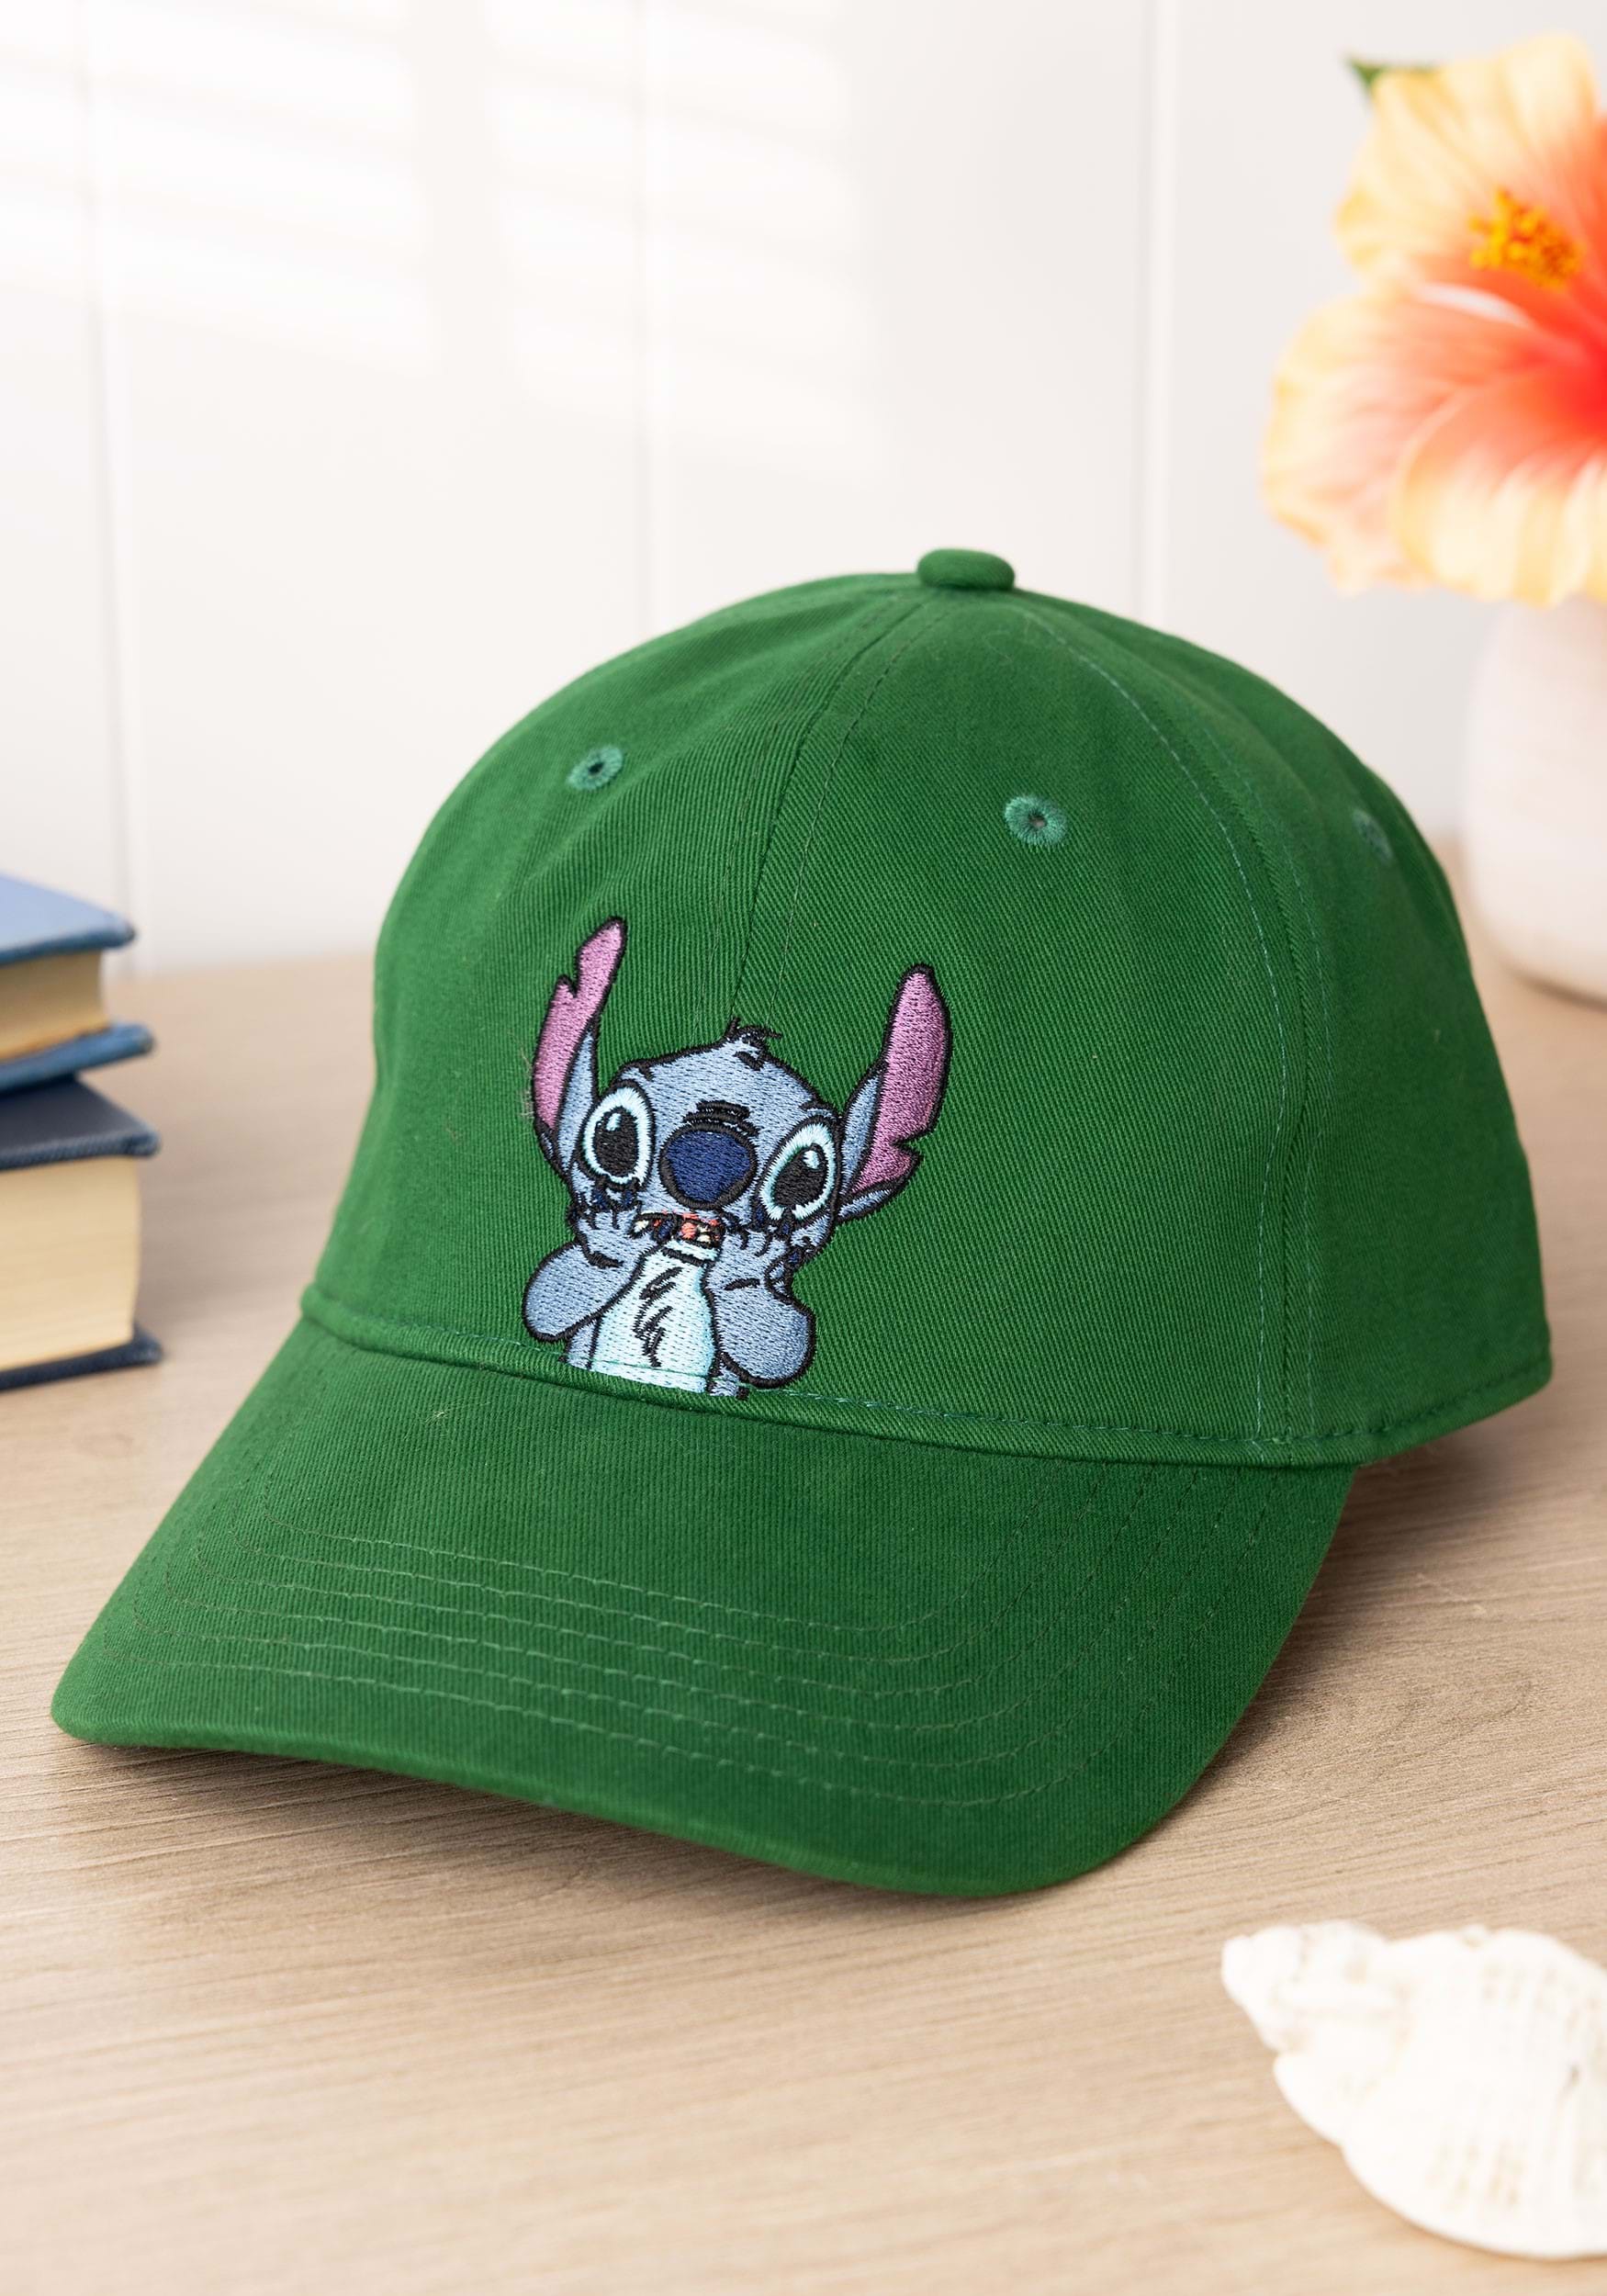 Stitch Hands on Face Peek-a-Boo Embroidered Dad Cap